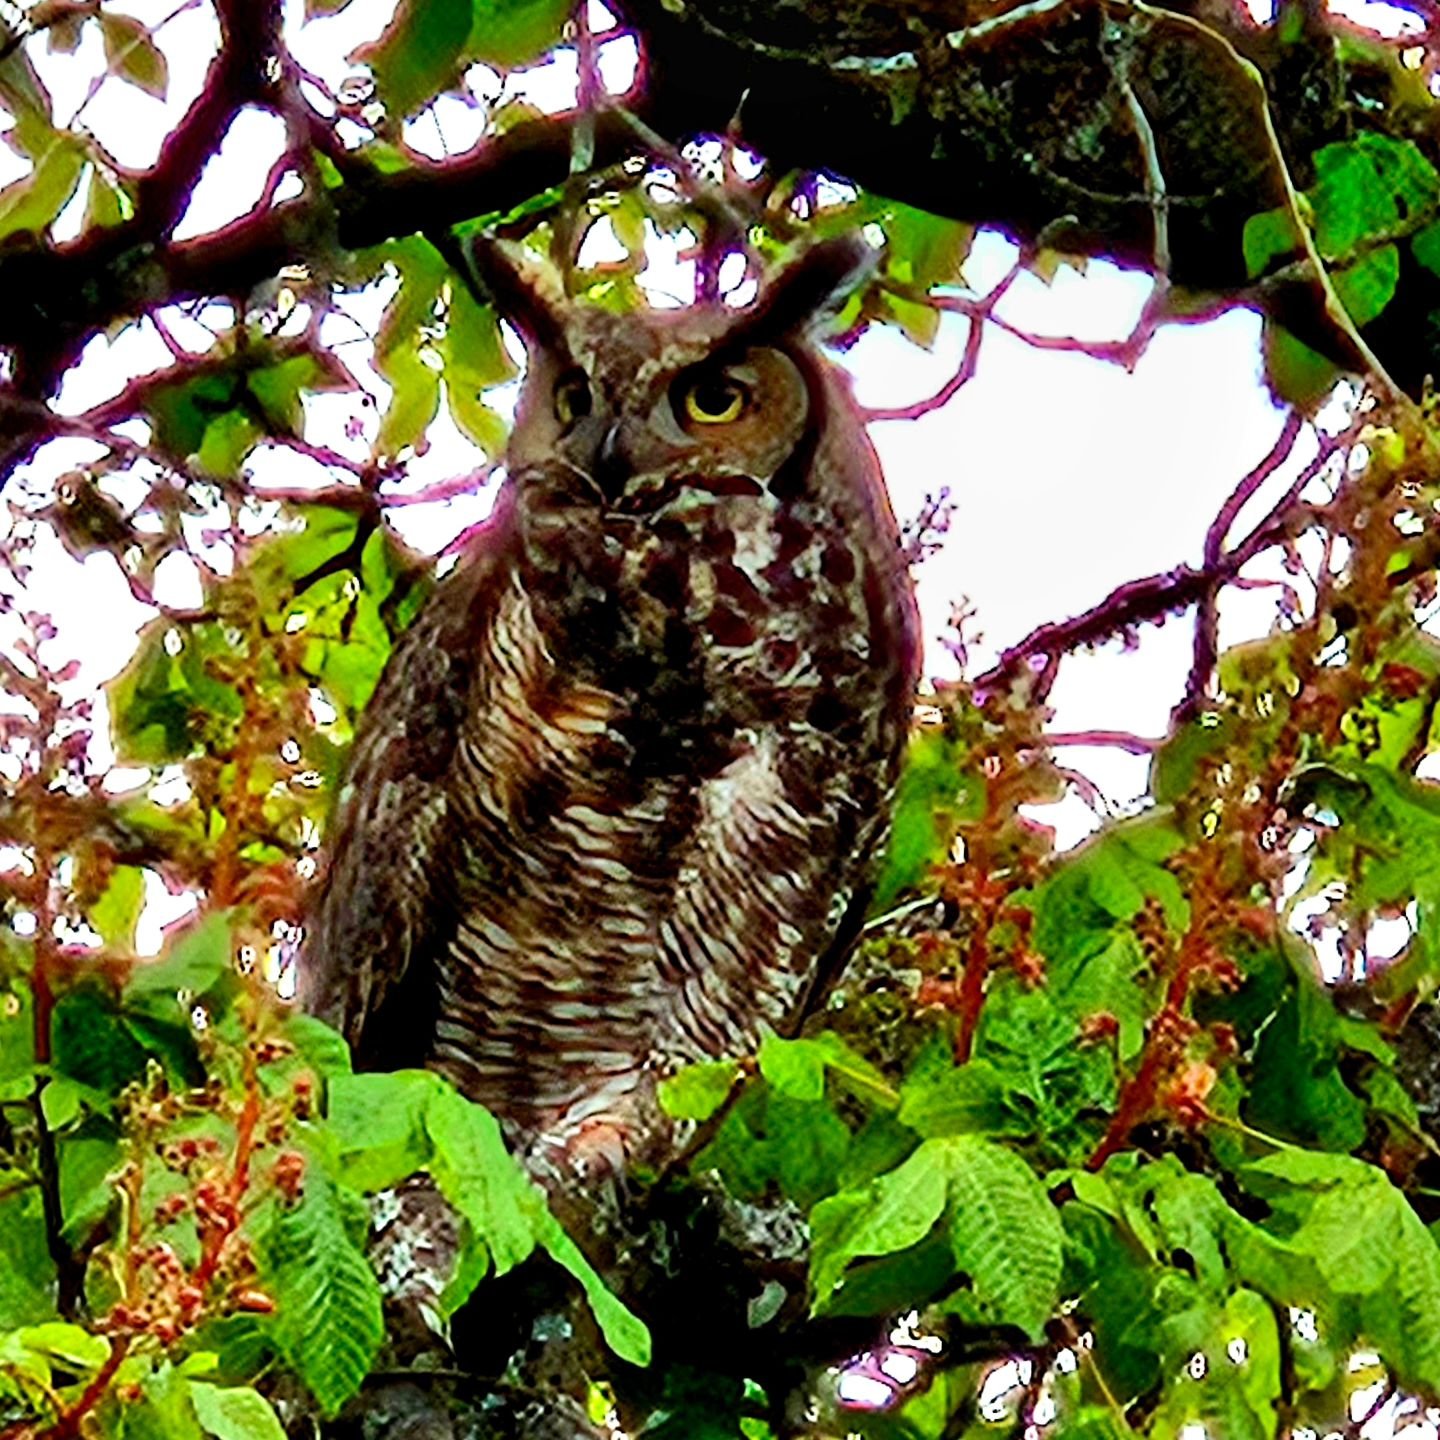 We've been serenade by this beautiful creature all morning and popped out our window to see it in our horse chestnut tree. It's been there for hours. I'm amazed.

#winerylife #hornedowl